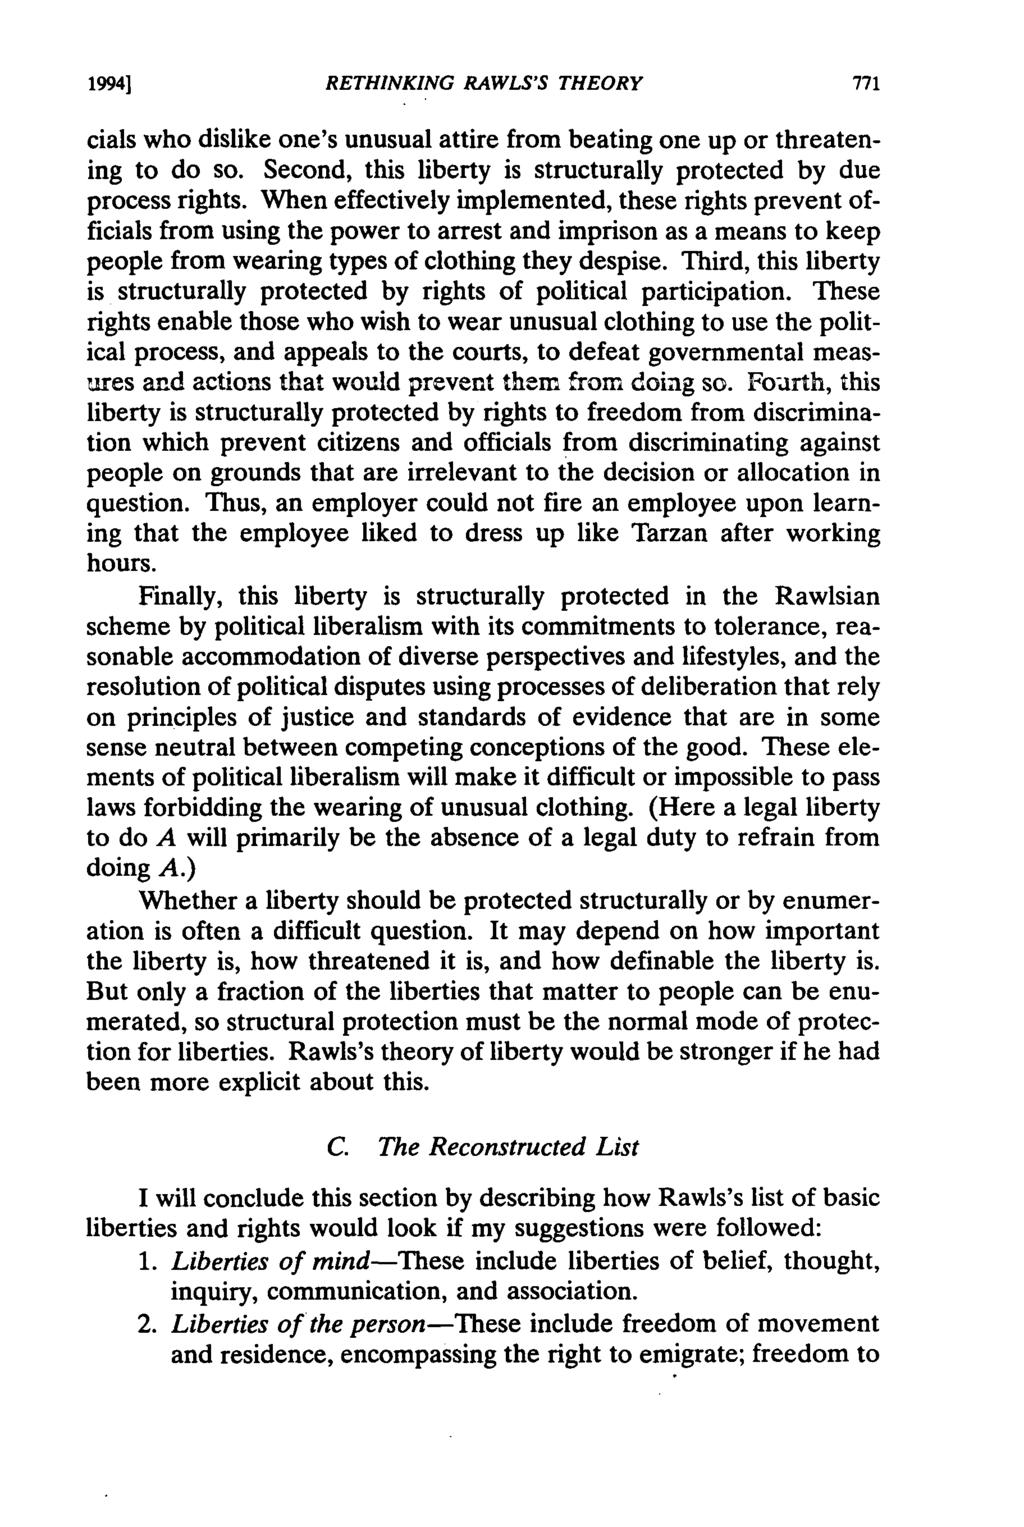 19941 RETHINKING RAWLS'S THEORY cials who dislike one's unusual attire from beating one up or threatening to do so. Second, this liberty is structurally protected by due process rights.